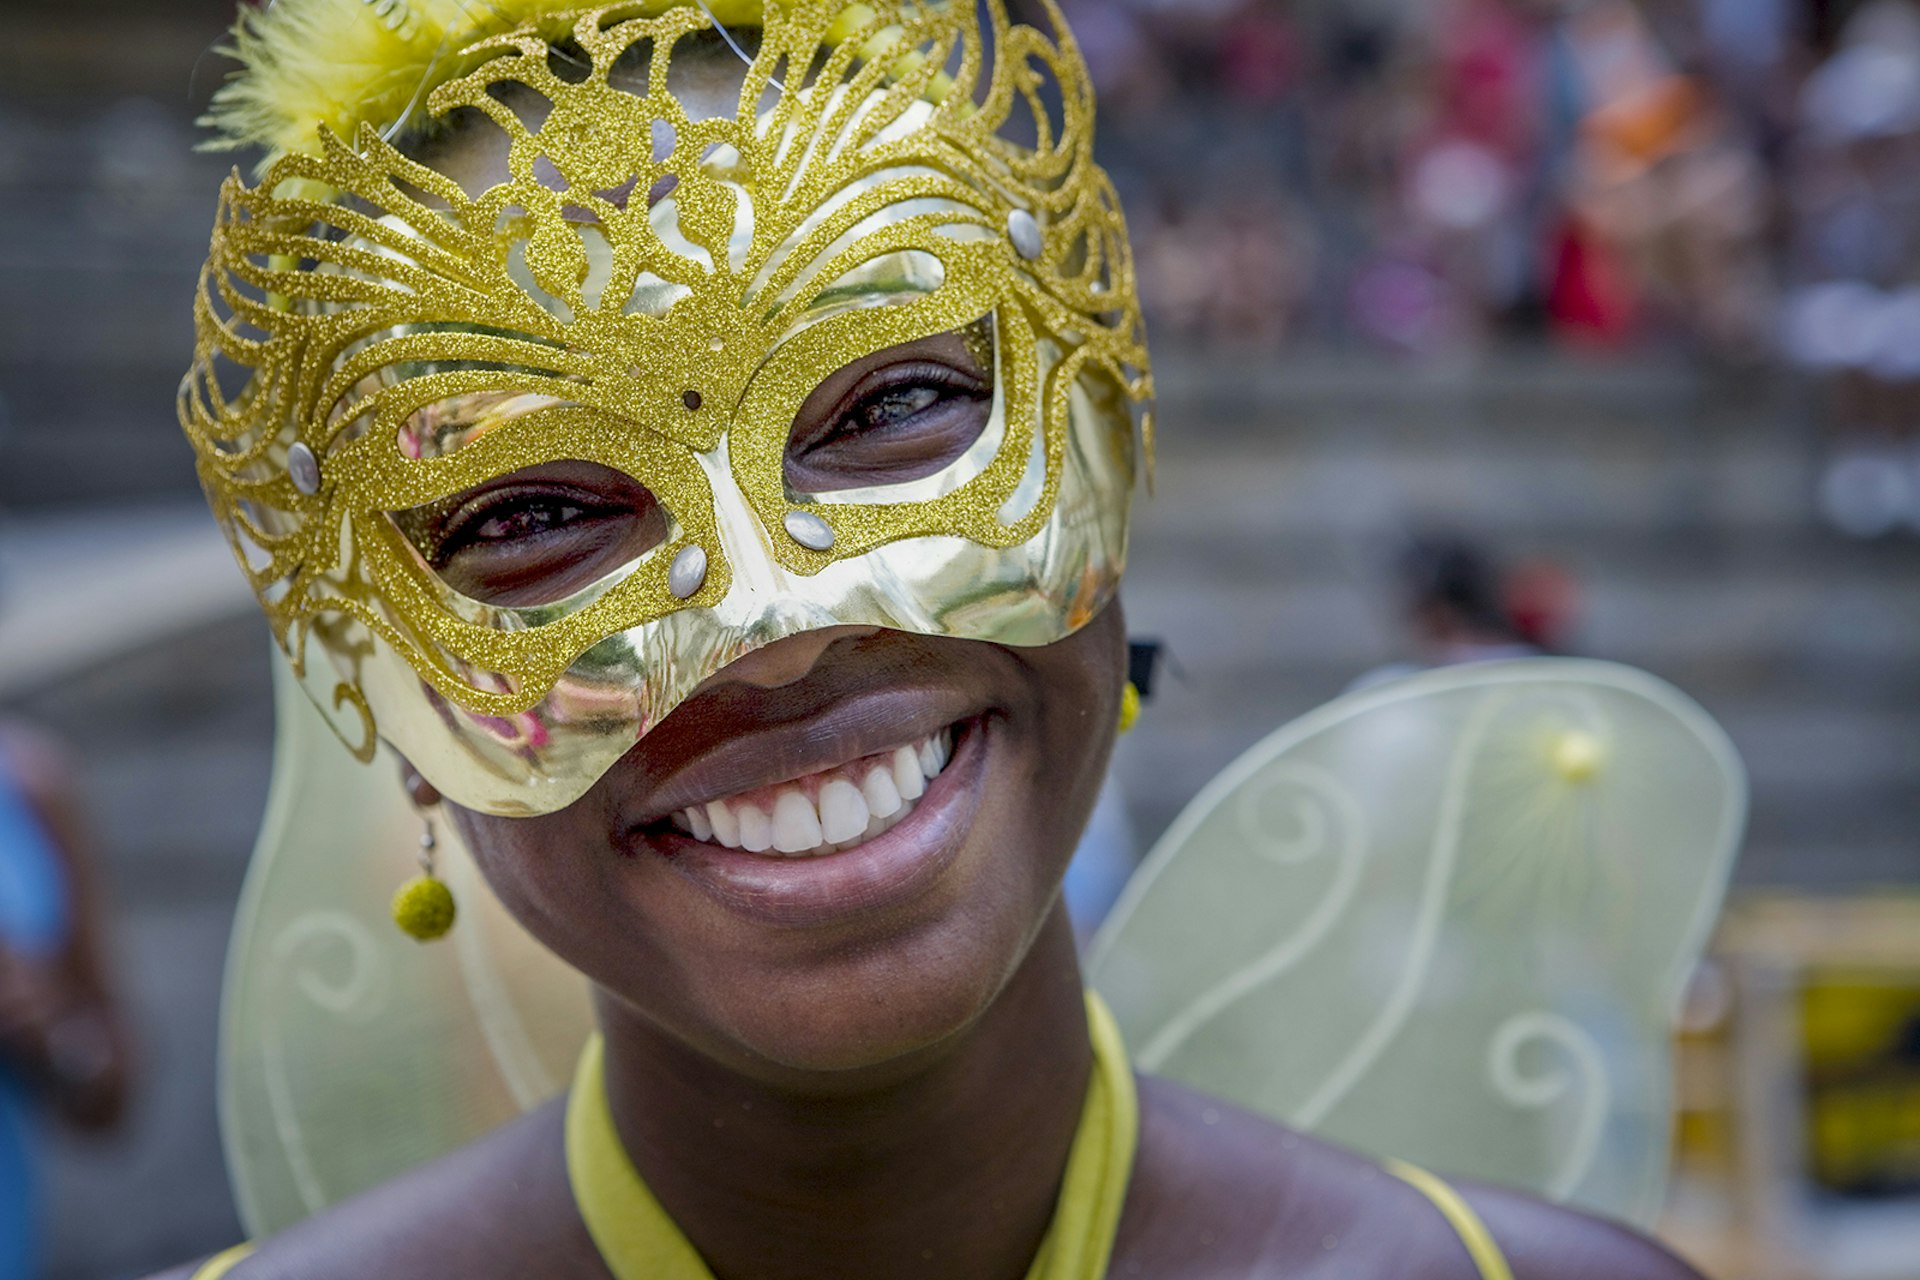 A woman wearing a gold masquerade mask and fairy wings smiles at the camera